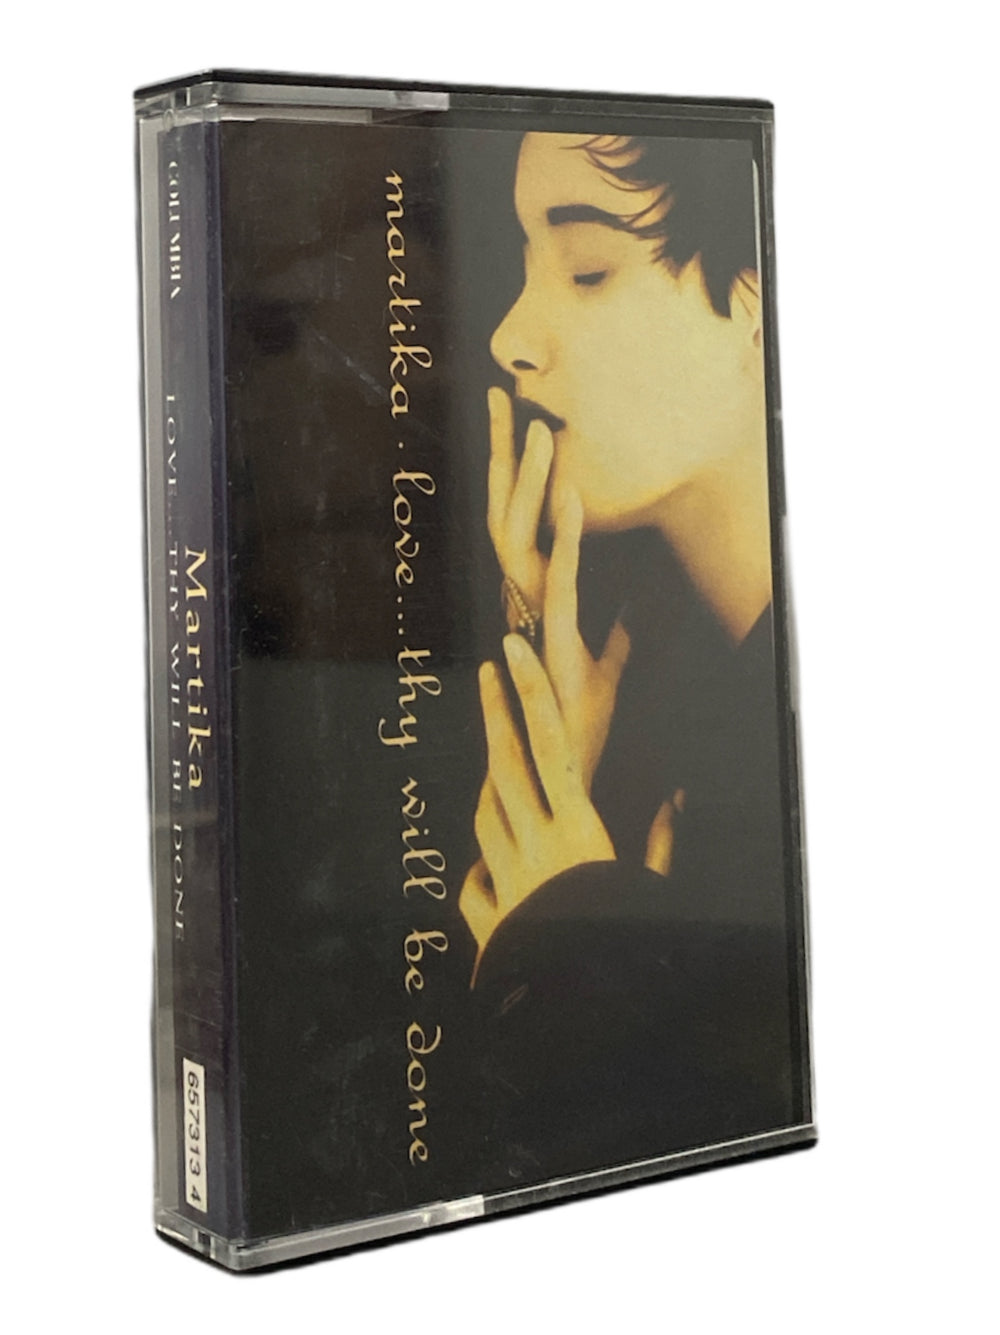 Prince – Martika Love... Thy Will Be Done  Tape Cassette Single 1991 UK Release Prince